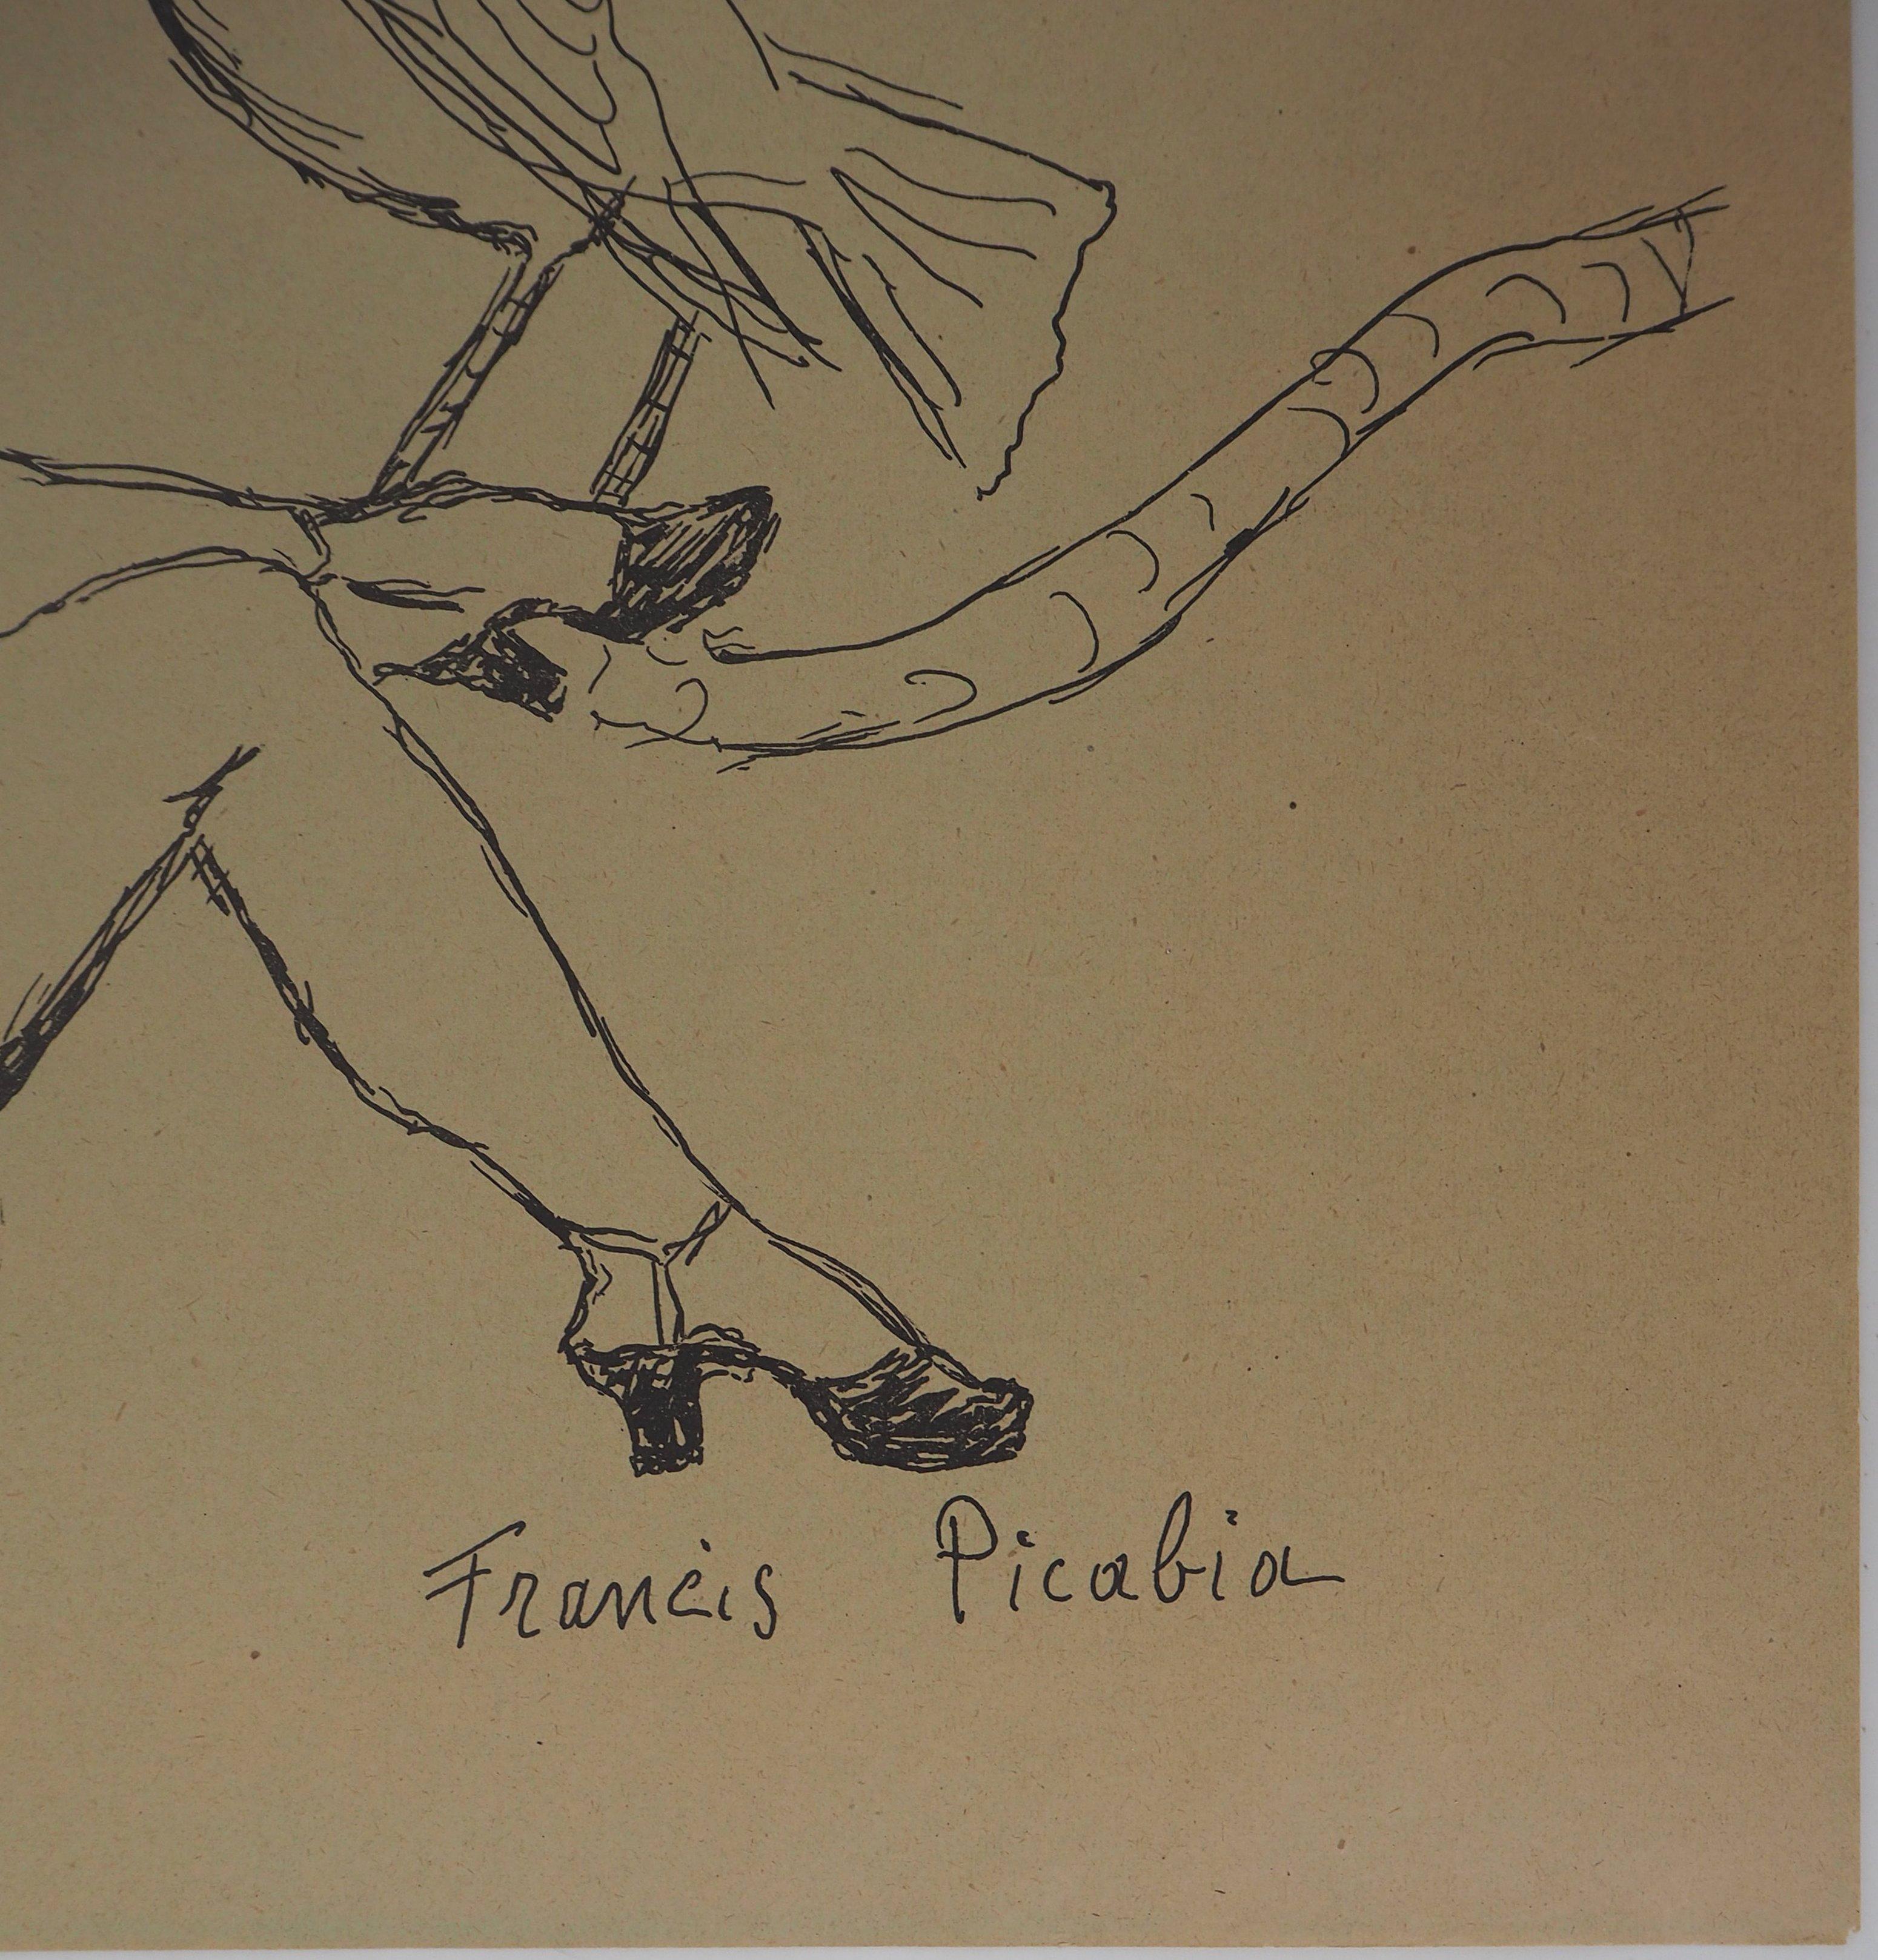 Francis PICABIA
Nice Weather : Nude with Loving Birds, 1948

Original lithograph 
Printed signature in the plate
On paper 56 x 45 cm (c. 22 x 18 in)

REFERENCES : Francis Picabia : Singulier Ideal, page 447

Very good condition